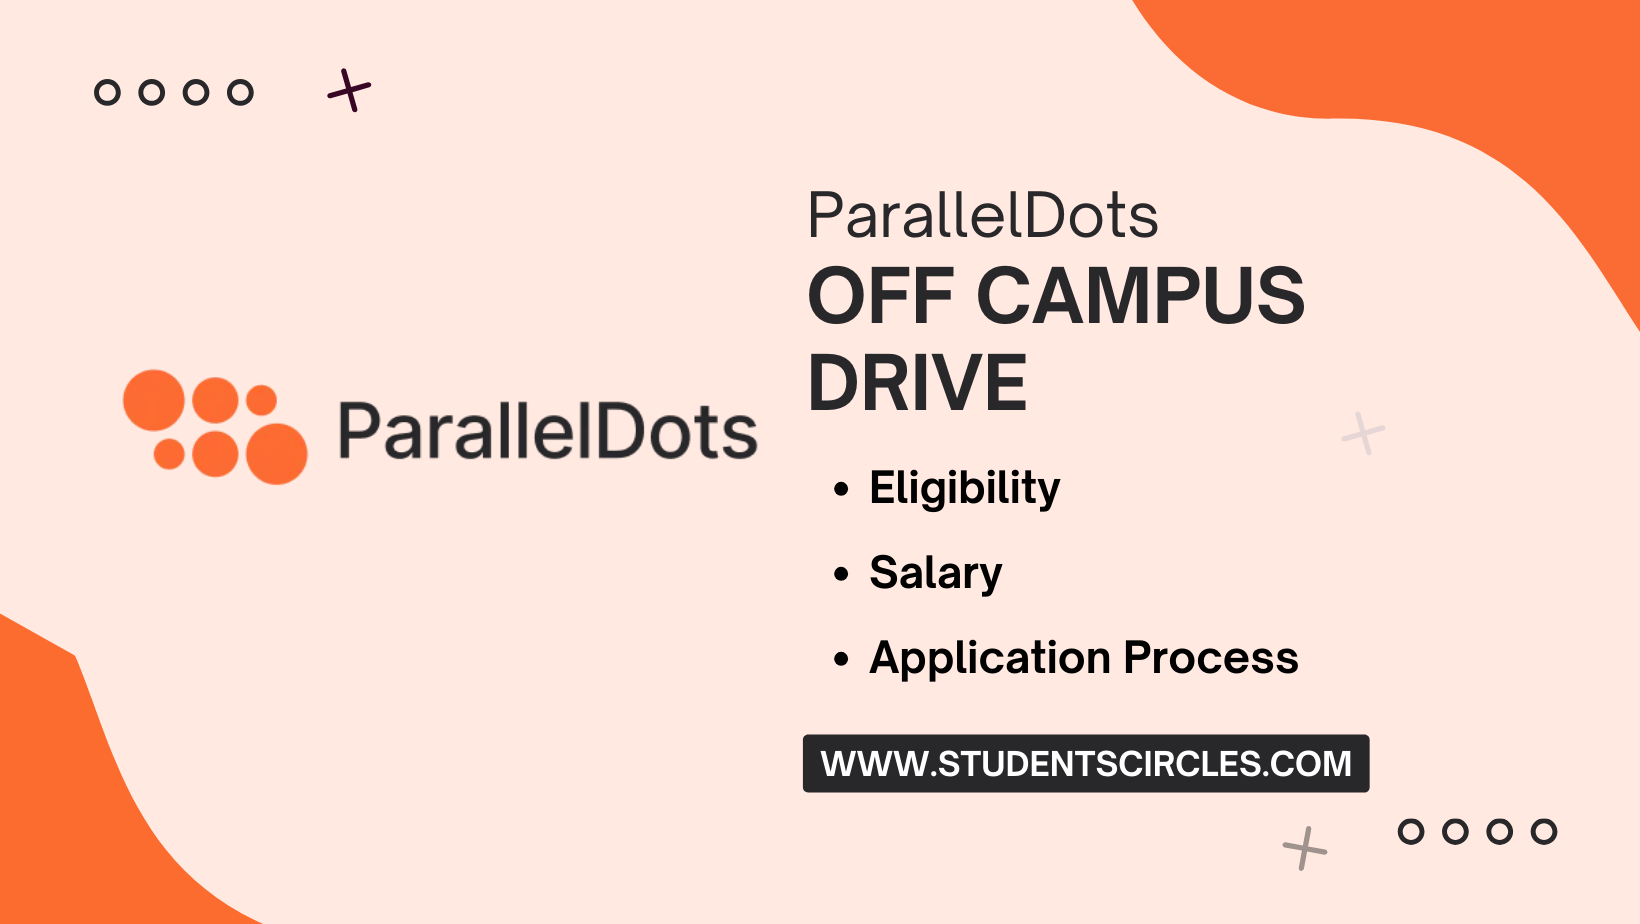 ParallelDots Off Campus Drive